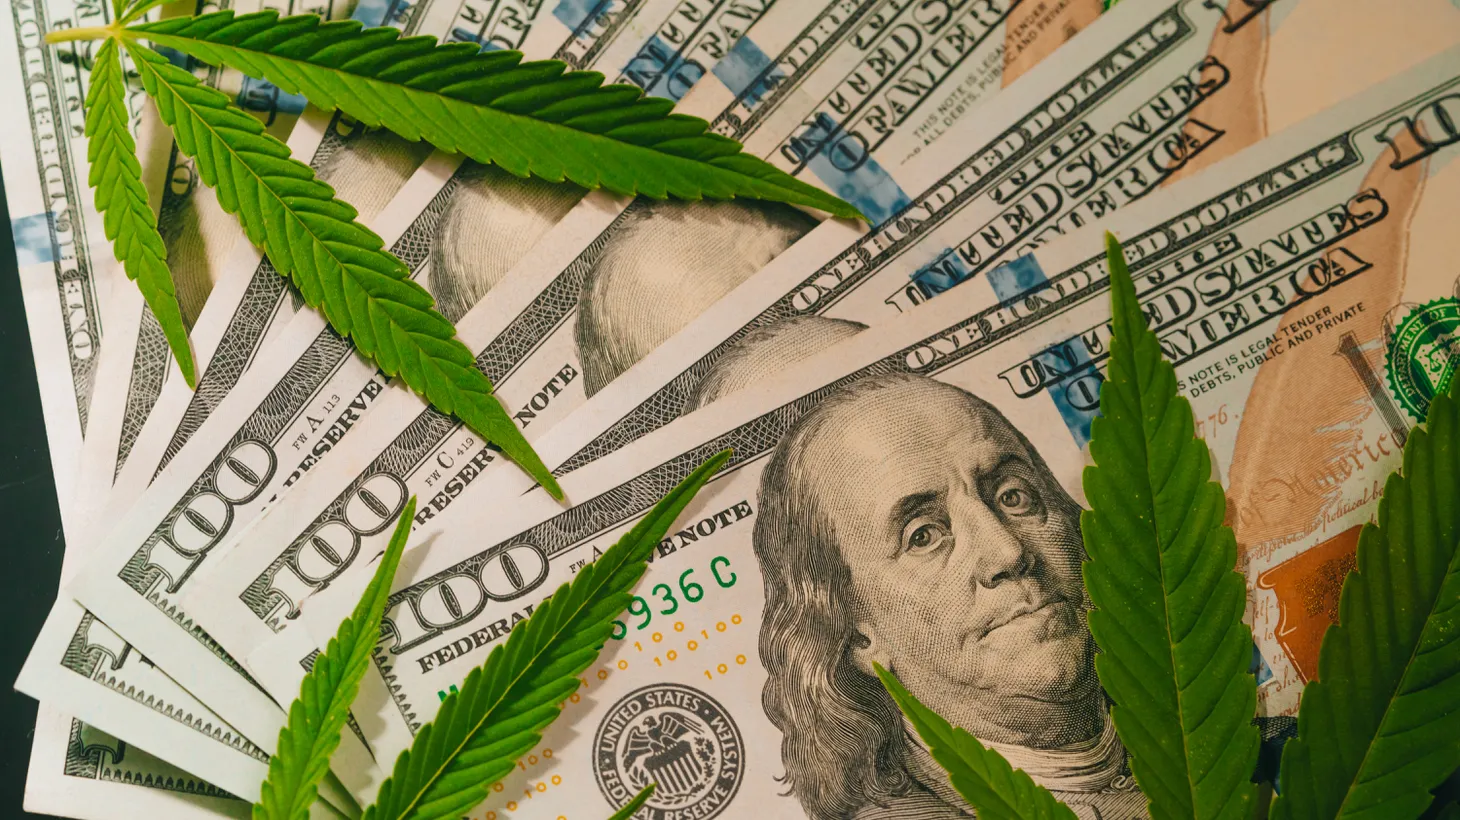 A California bill that sets up the framework for interstate commerce could be critical for the state’s cannabis farmers, says Leafly Senior Editor David Downs.